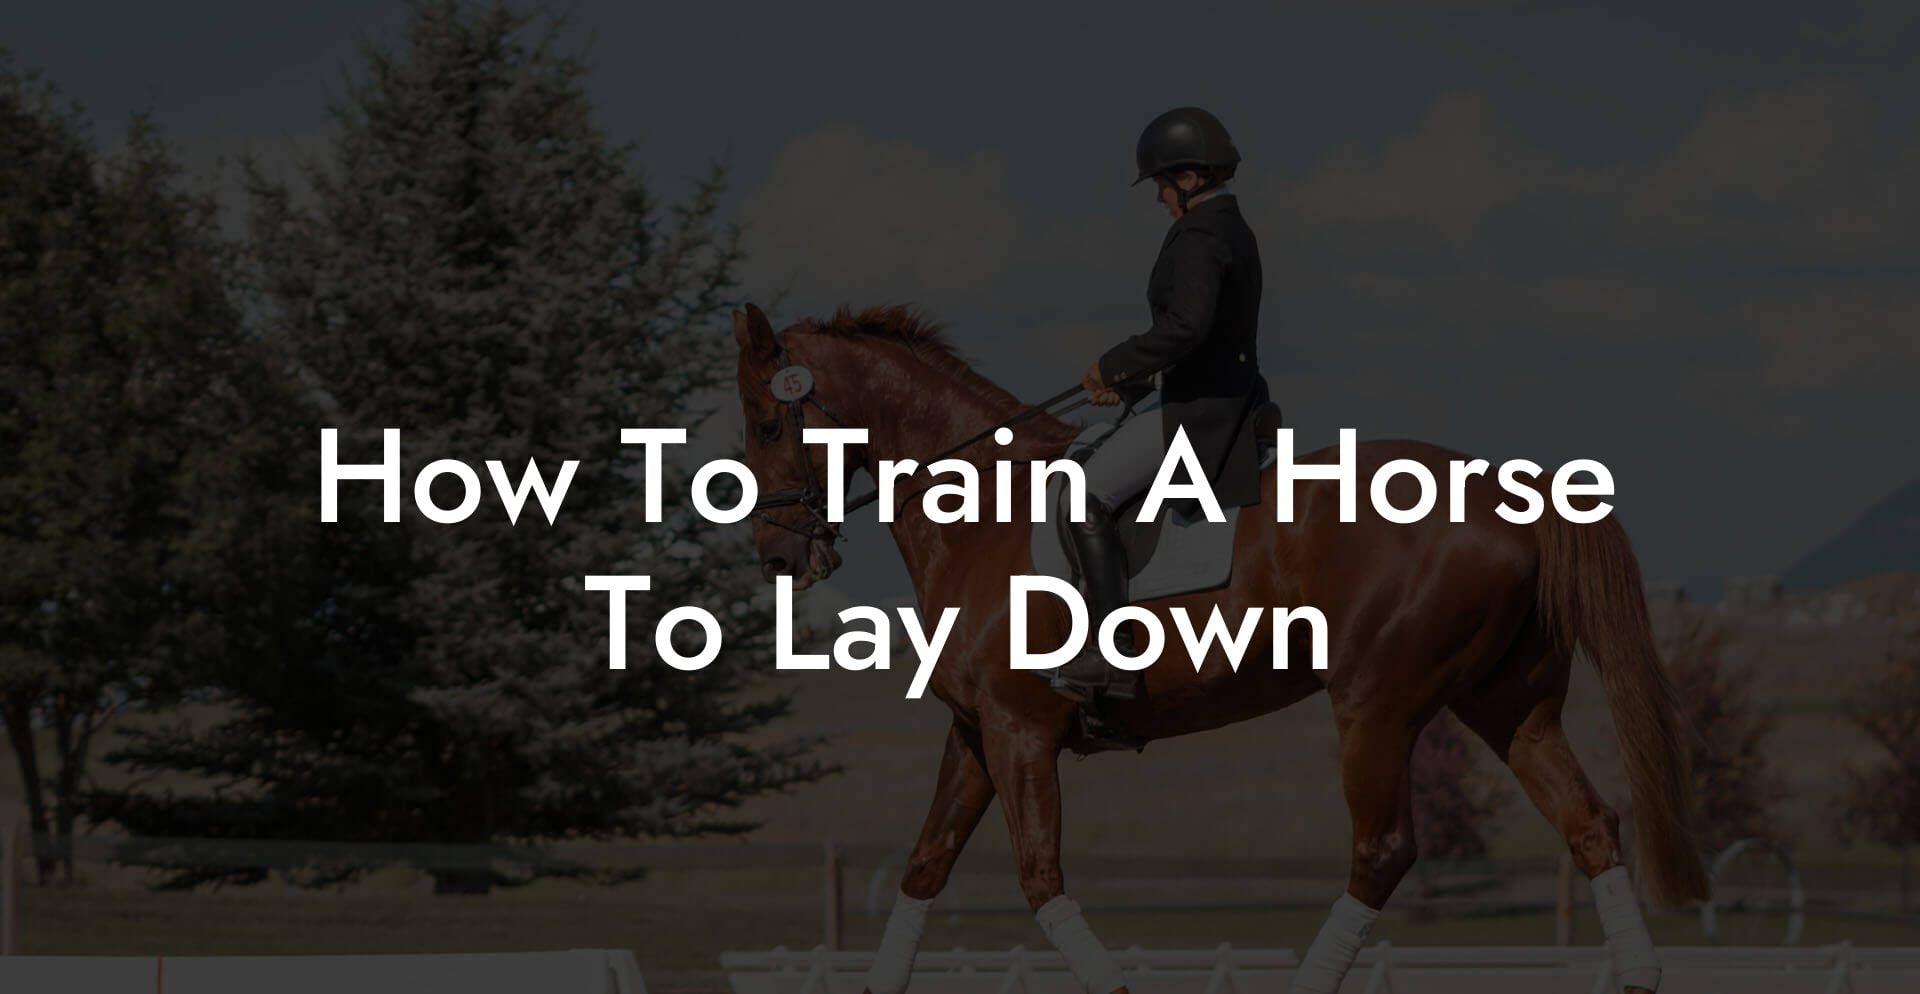 How To Train A Horse To Lay Down